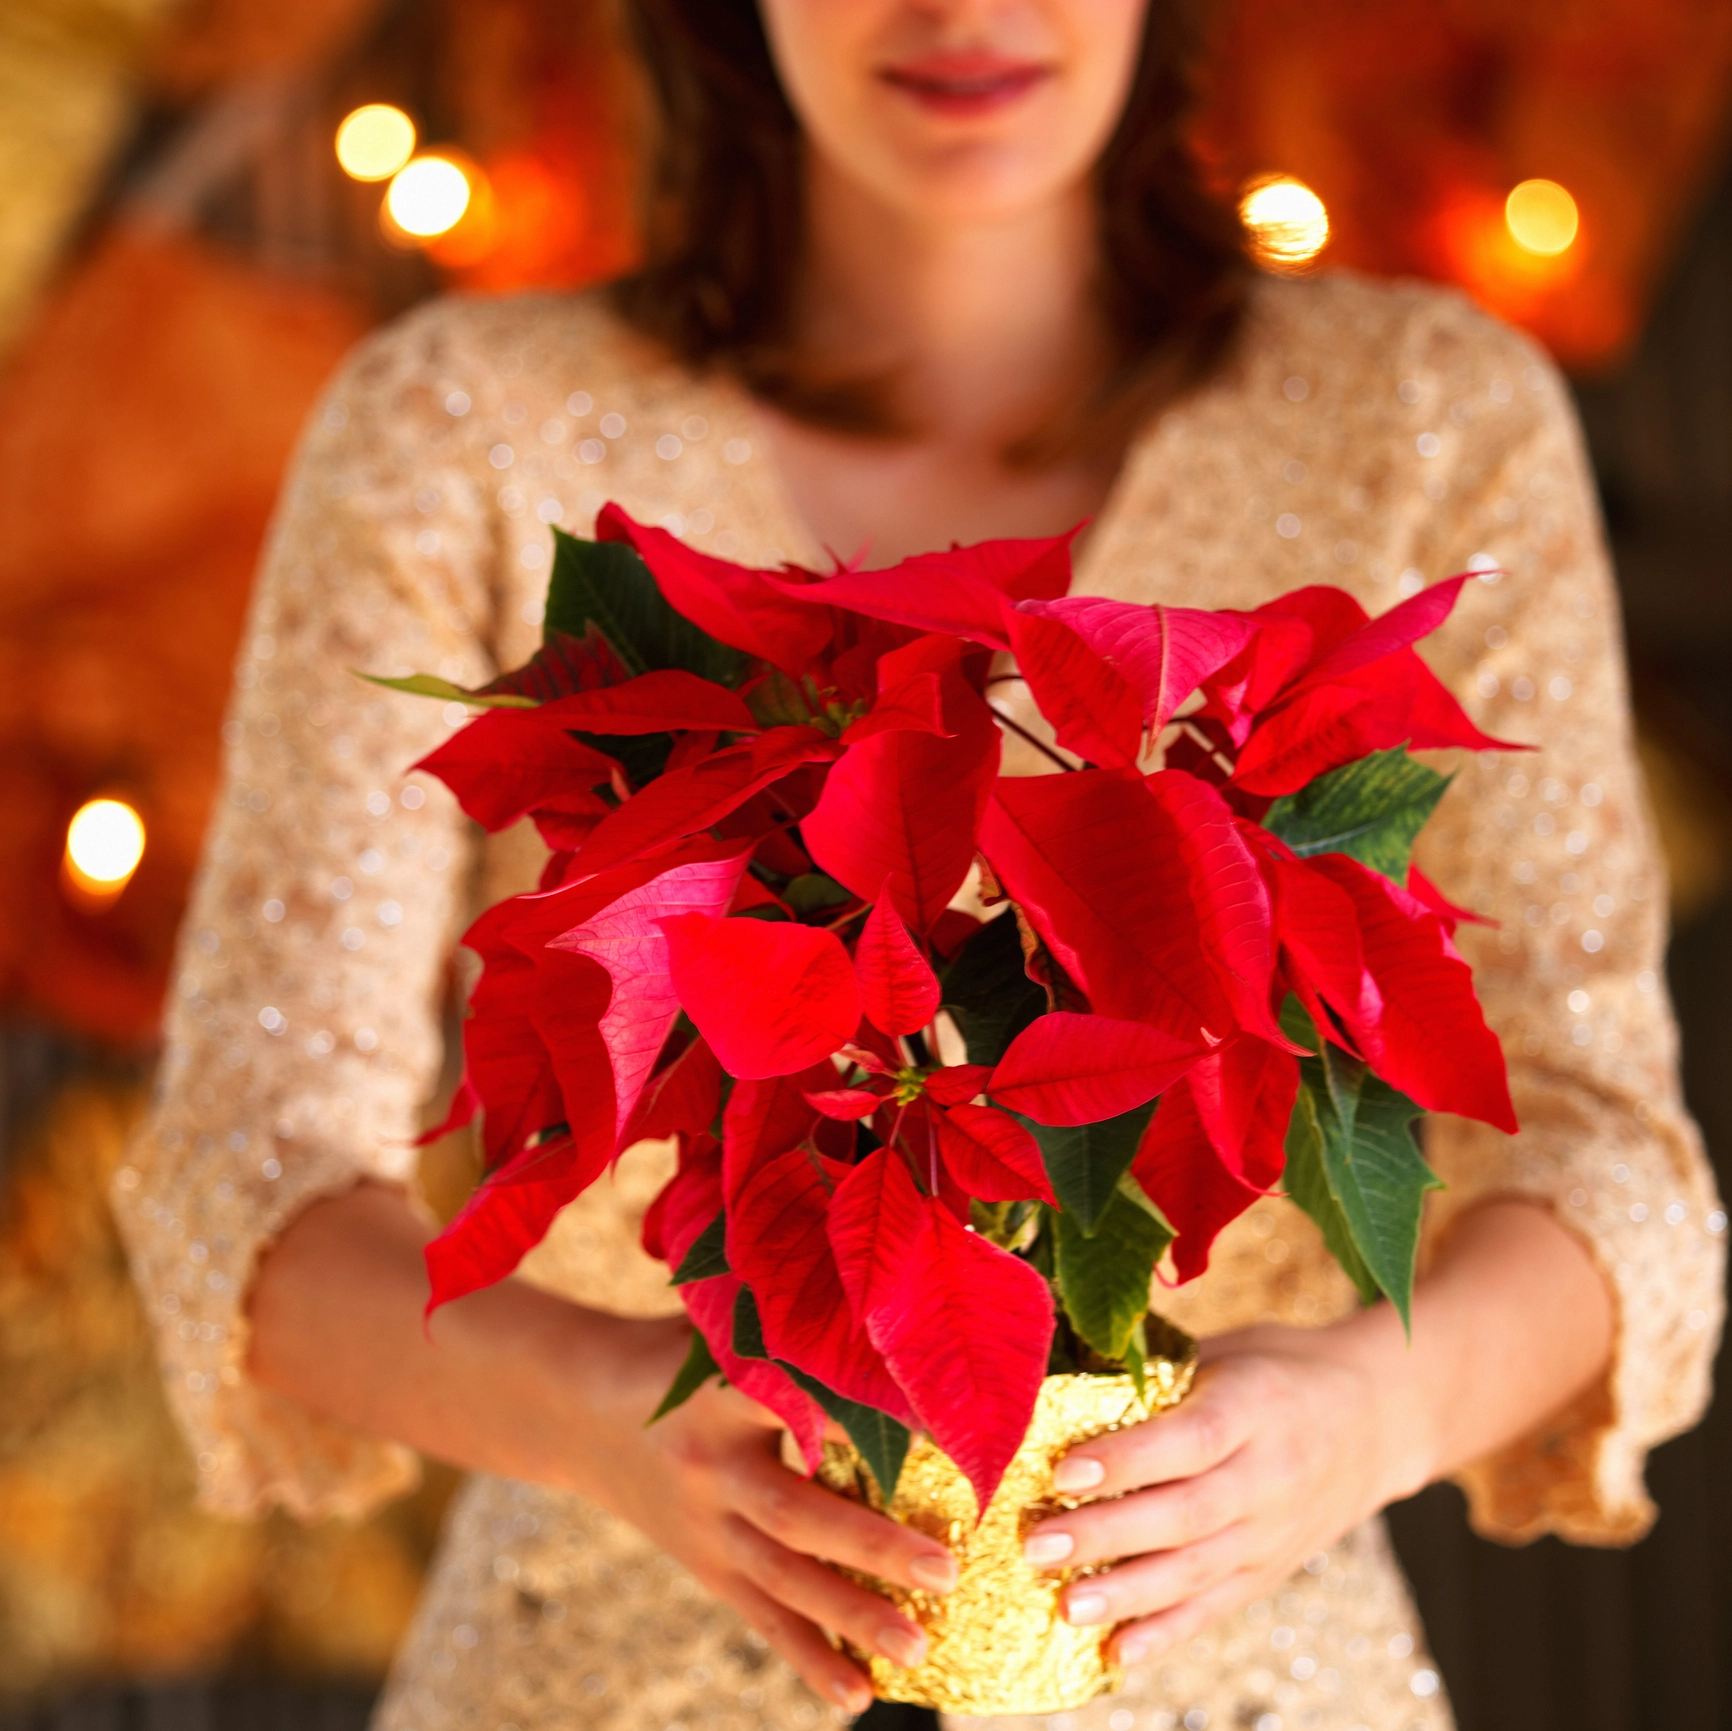 Looking for Christmas flowers in Singapore? Look no further than Windflower Florist.
